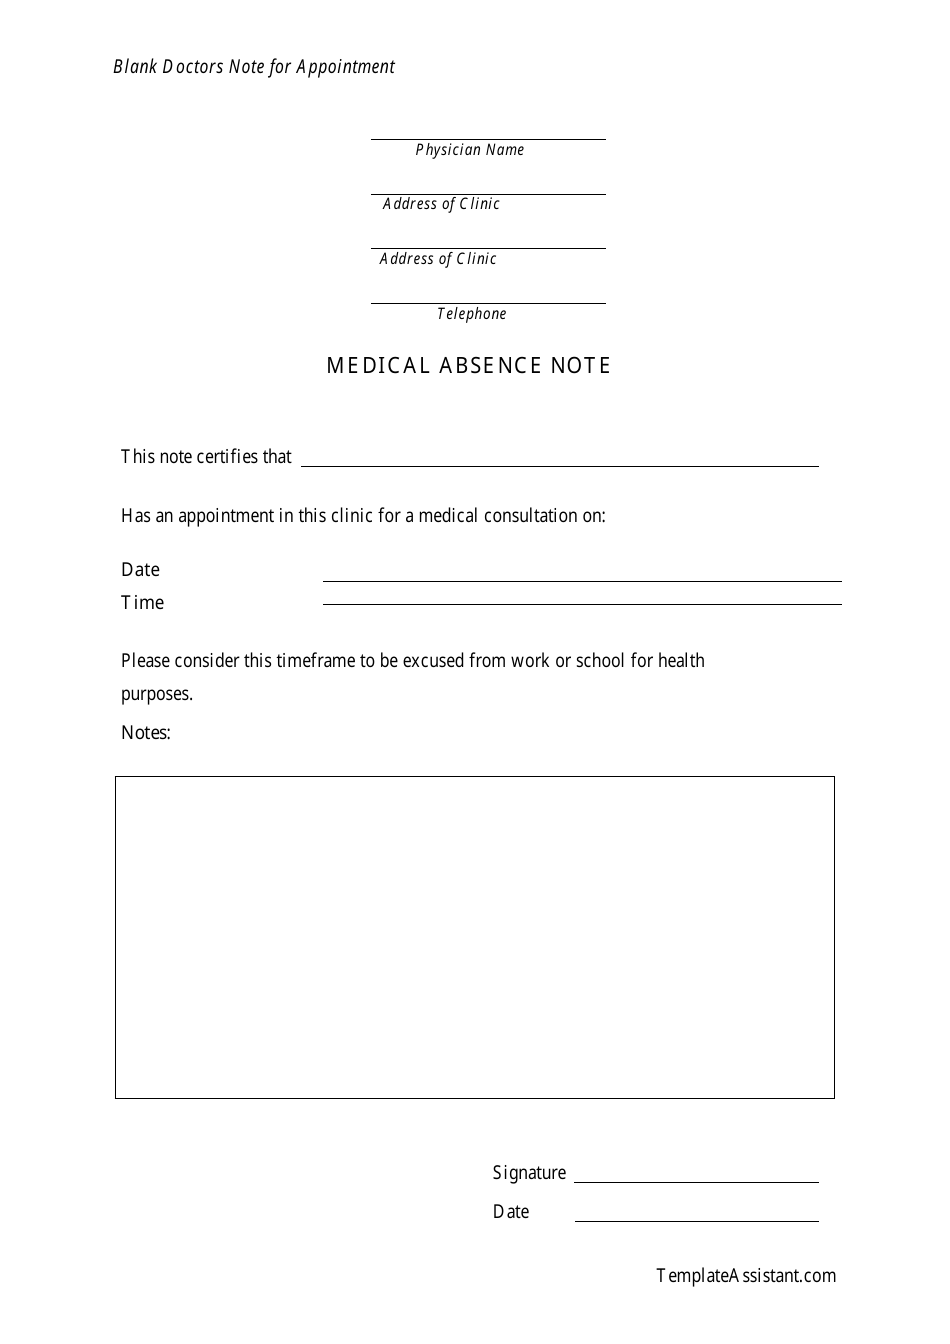 Medical Absence Note Form, Page 1